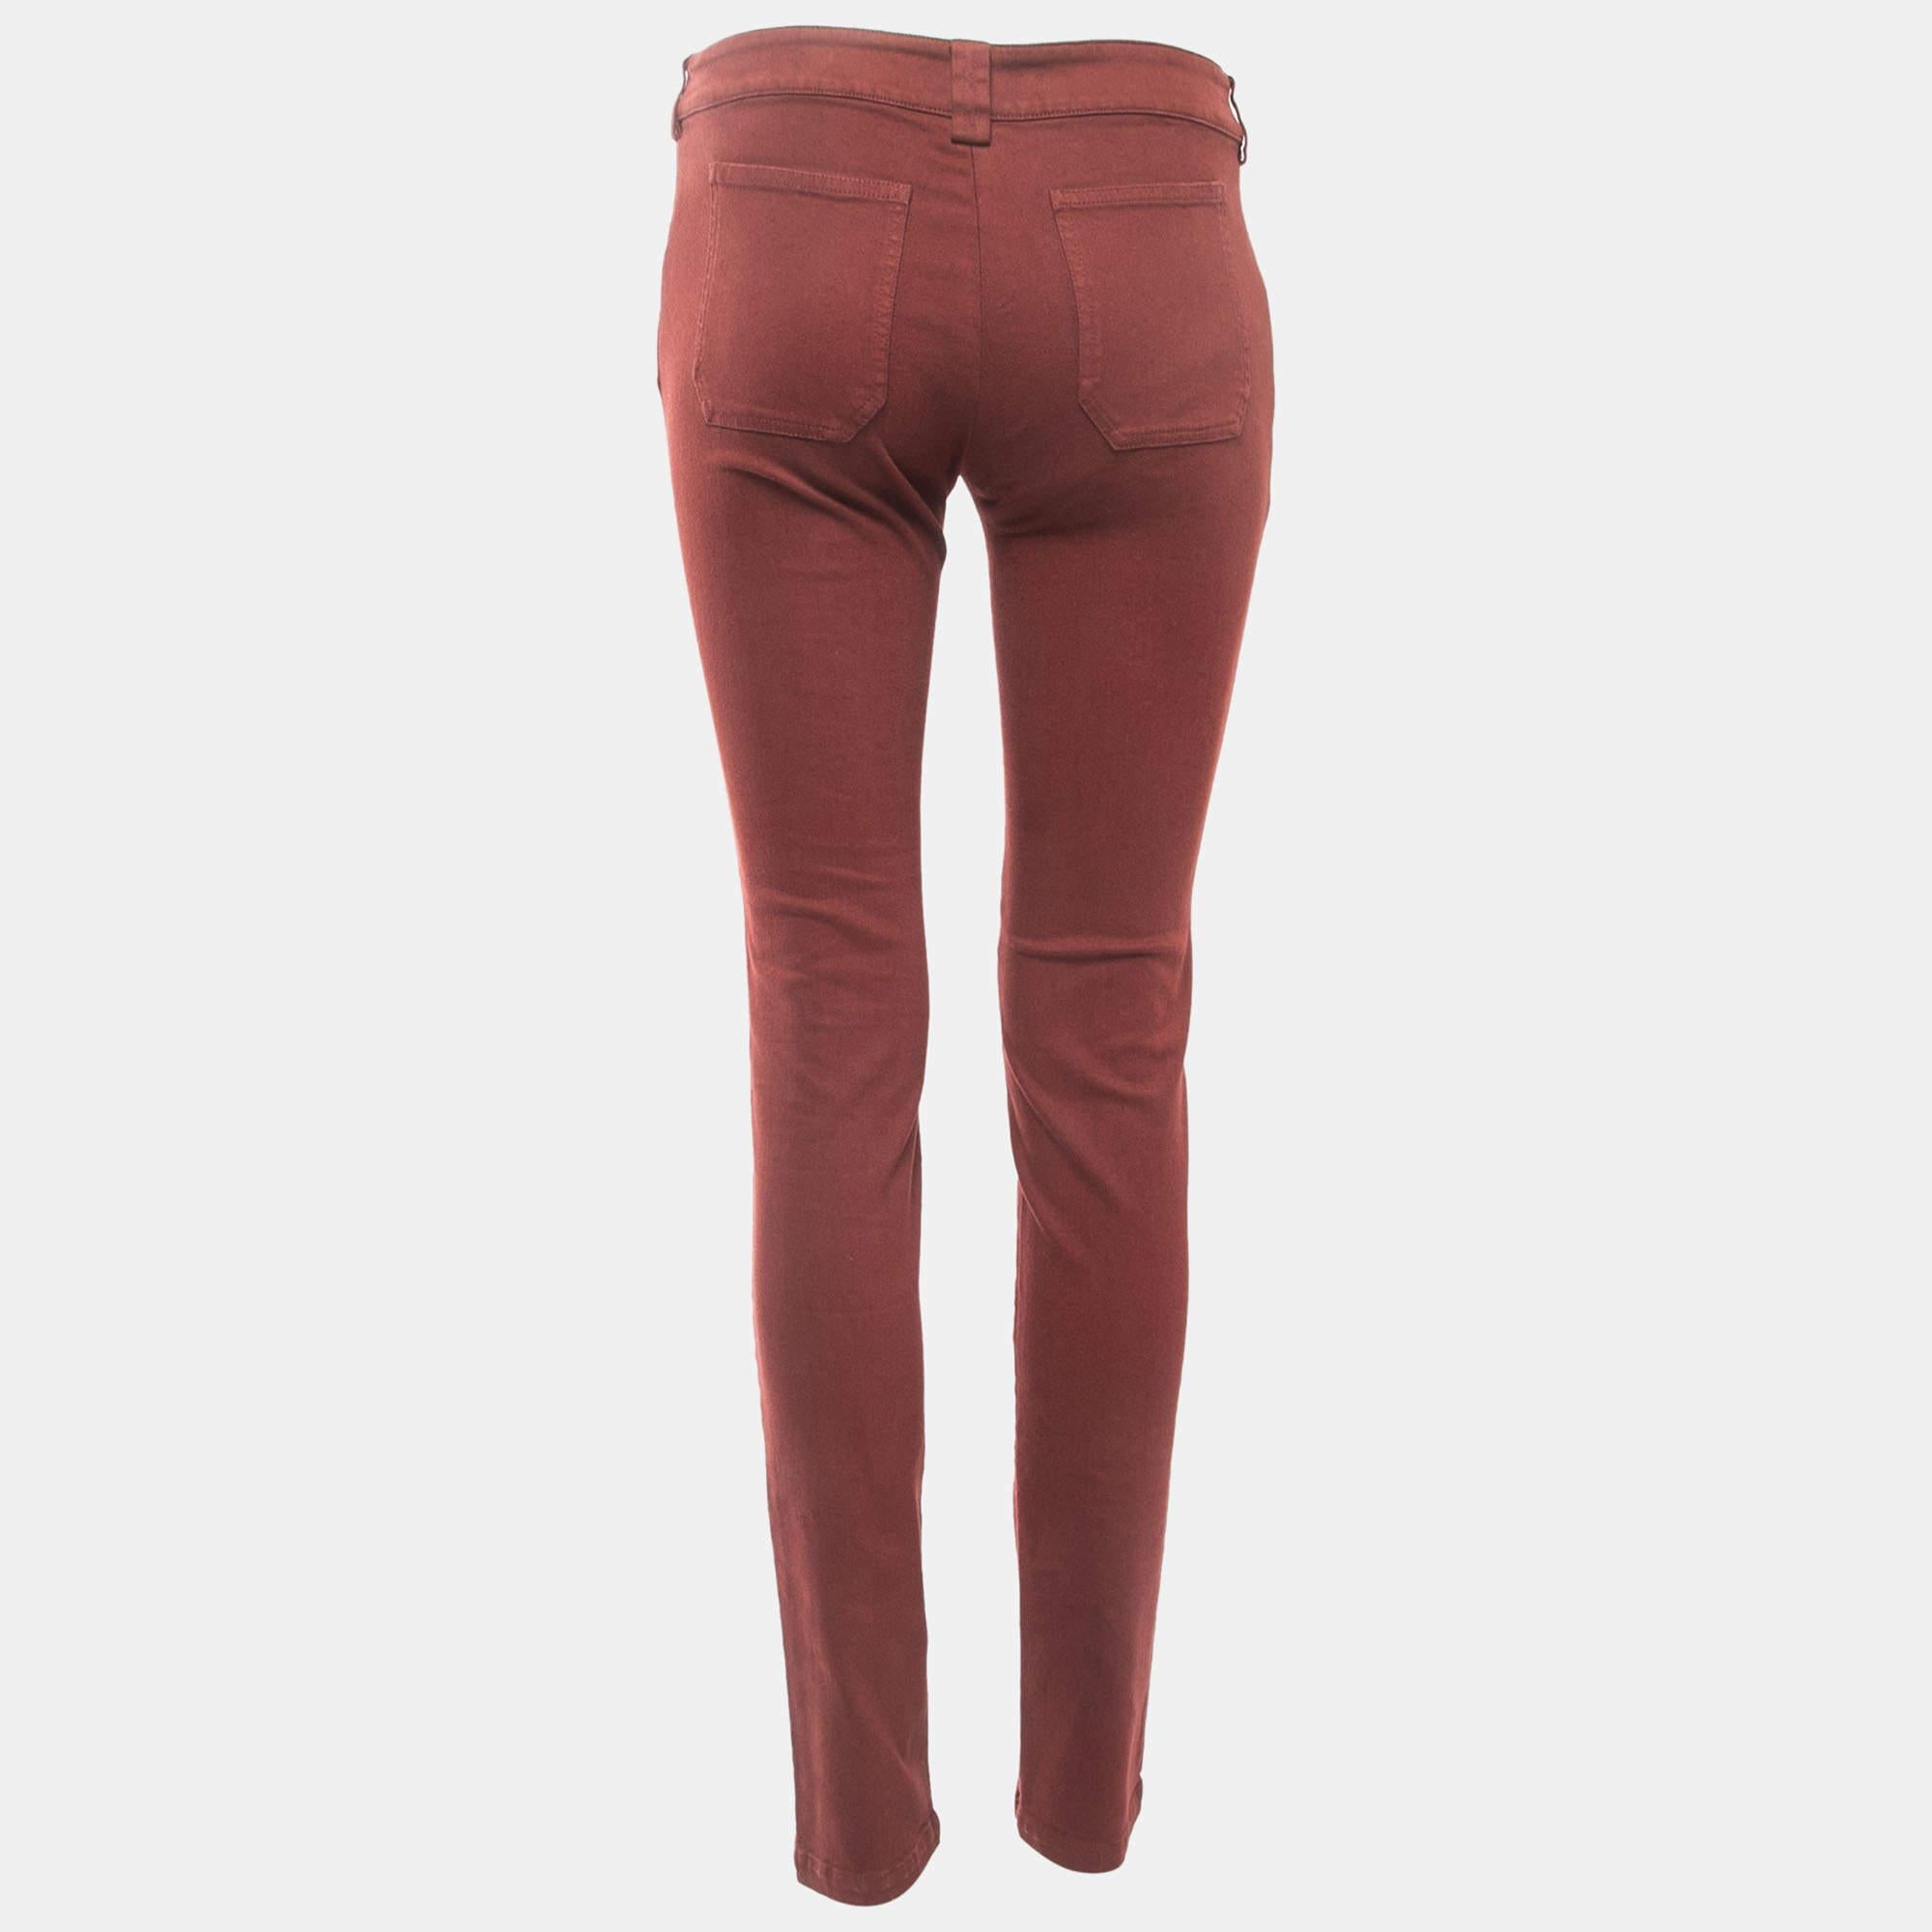 Experience the perfect fusion of comfort and sophistication with these designer women's trousers. Meticulously designed, they exude versatility and elegance, ensuring you look and feel confident throughout your day.

